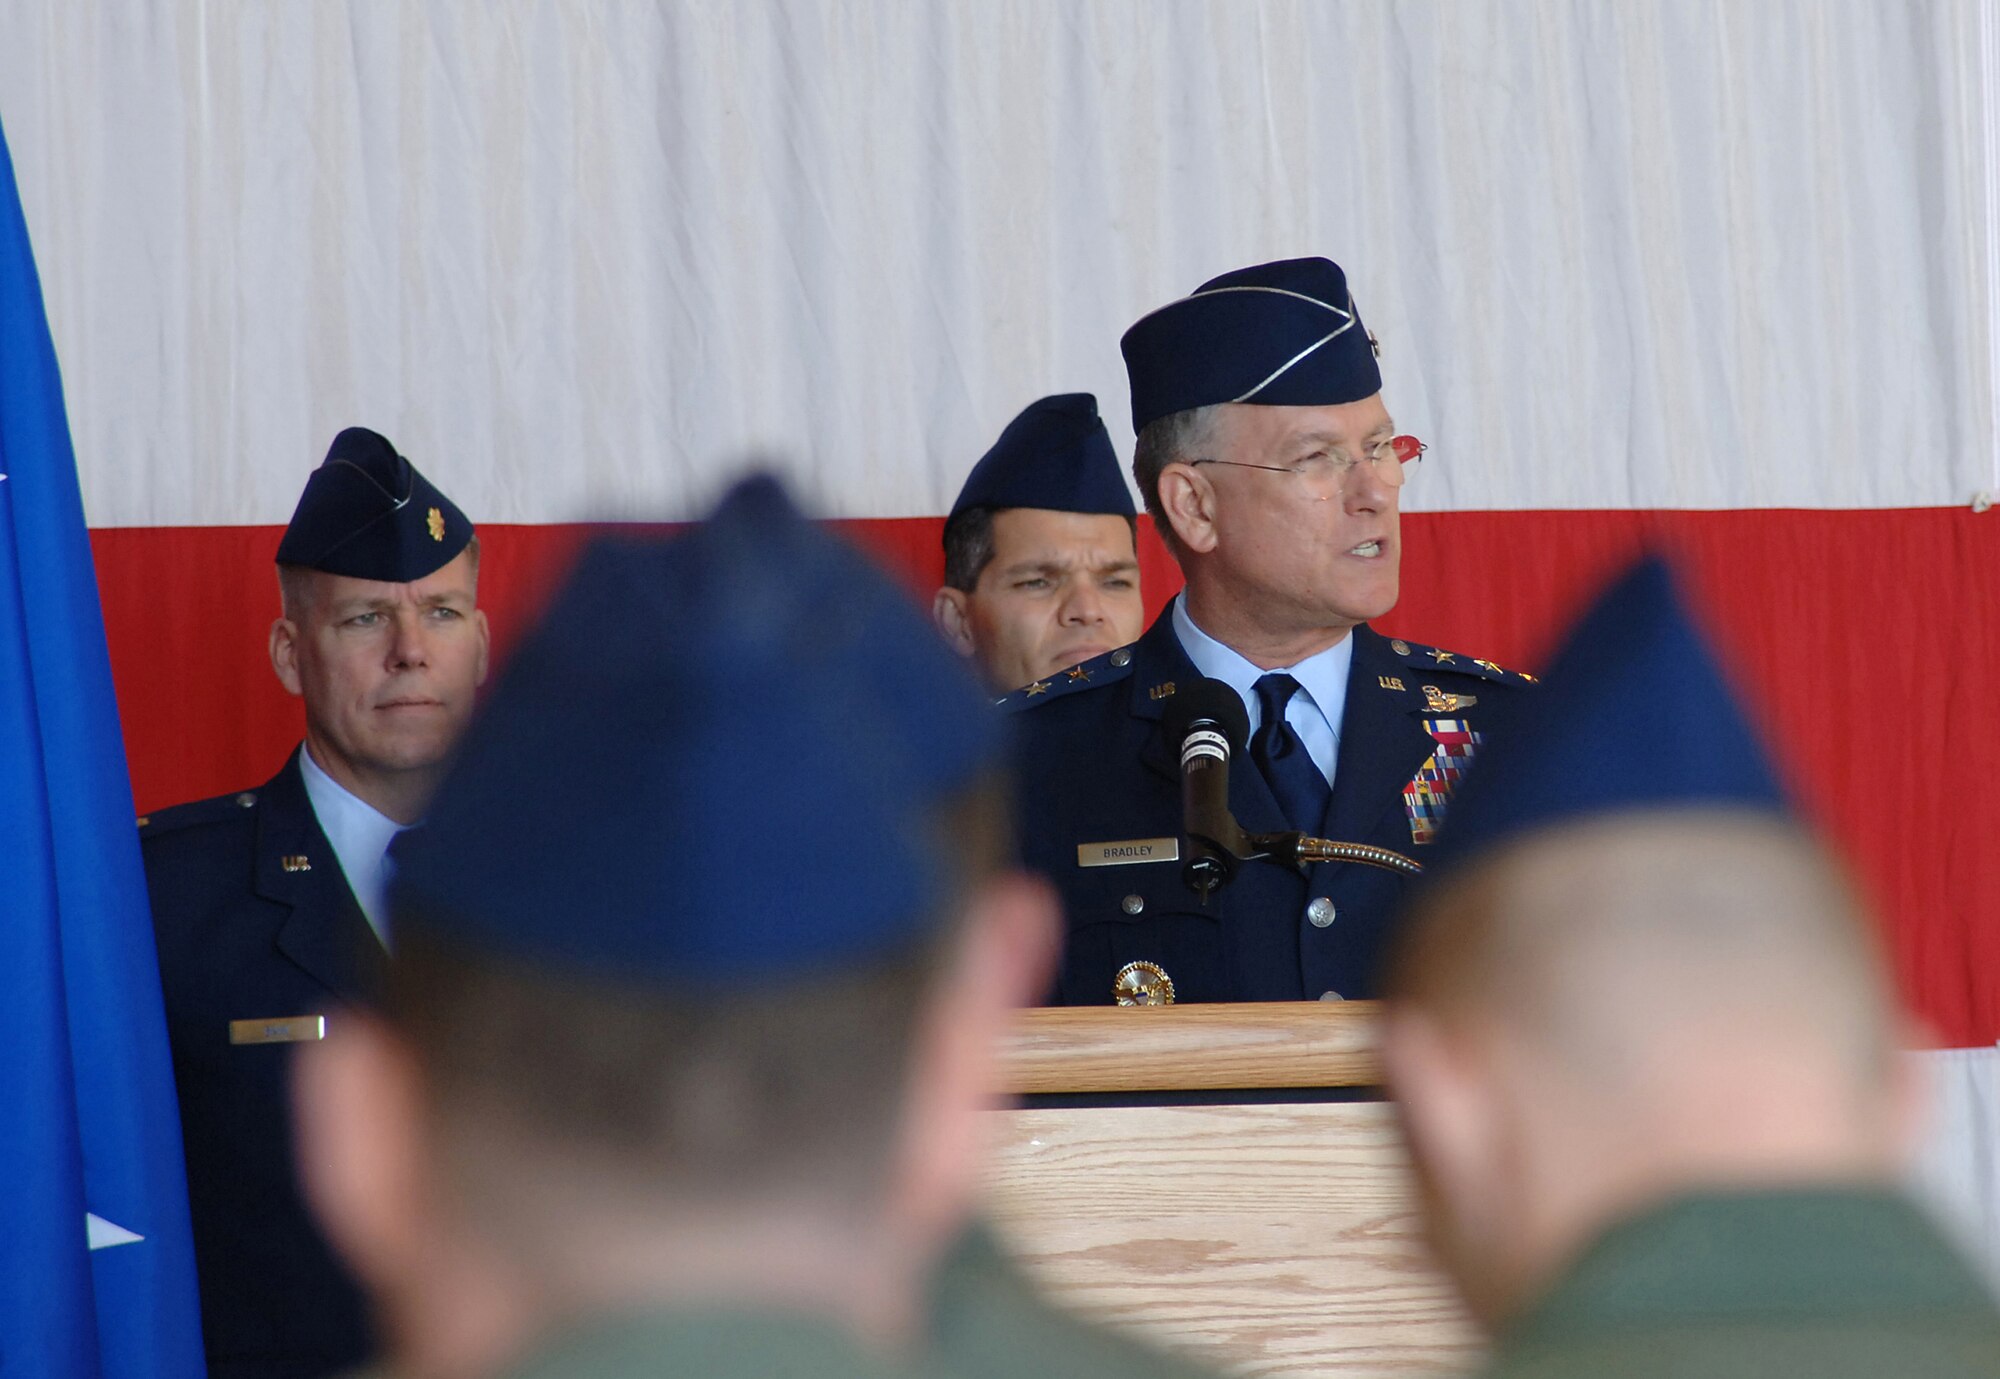 PETERSON AIR FORCE BASE, Colo. -- Lt. Gen. John Bradley, Chief of Air Force Reserve and commander of Air Force Reserve Command, gives a speech during the 310th Space Wing Activation ceremony of the Air Force Reserve's first-ever space wing April 4 at Peterson. (U.S. Air Force photo/Amber Whittington)